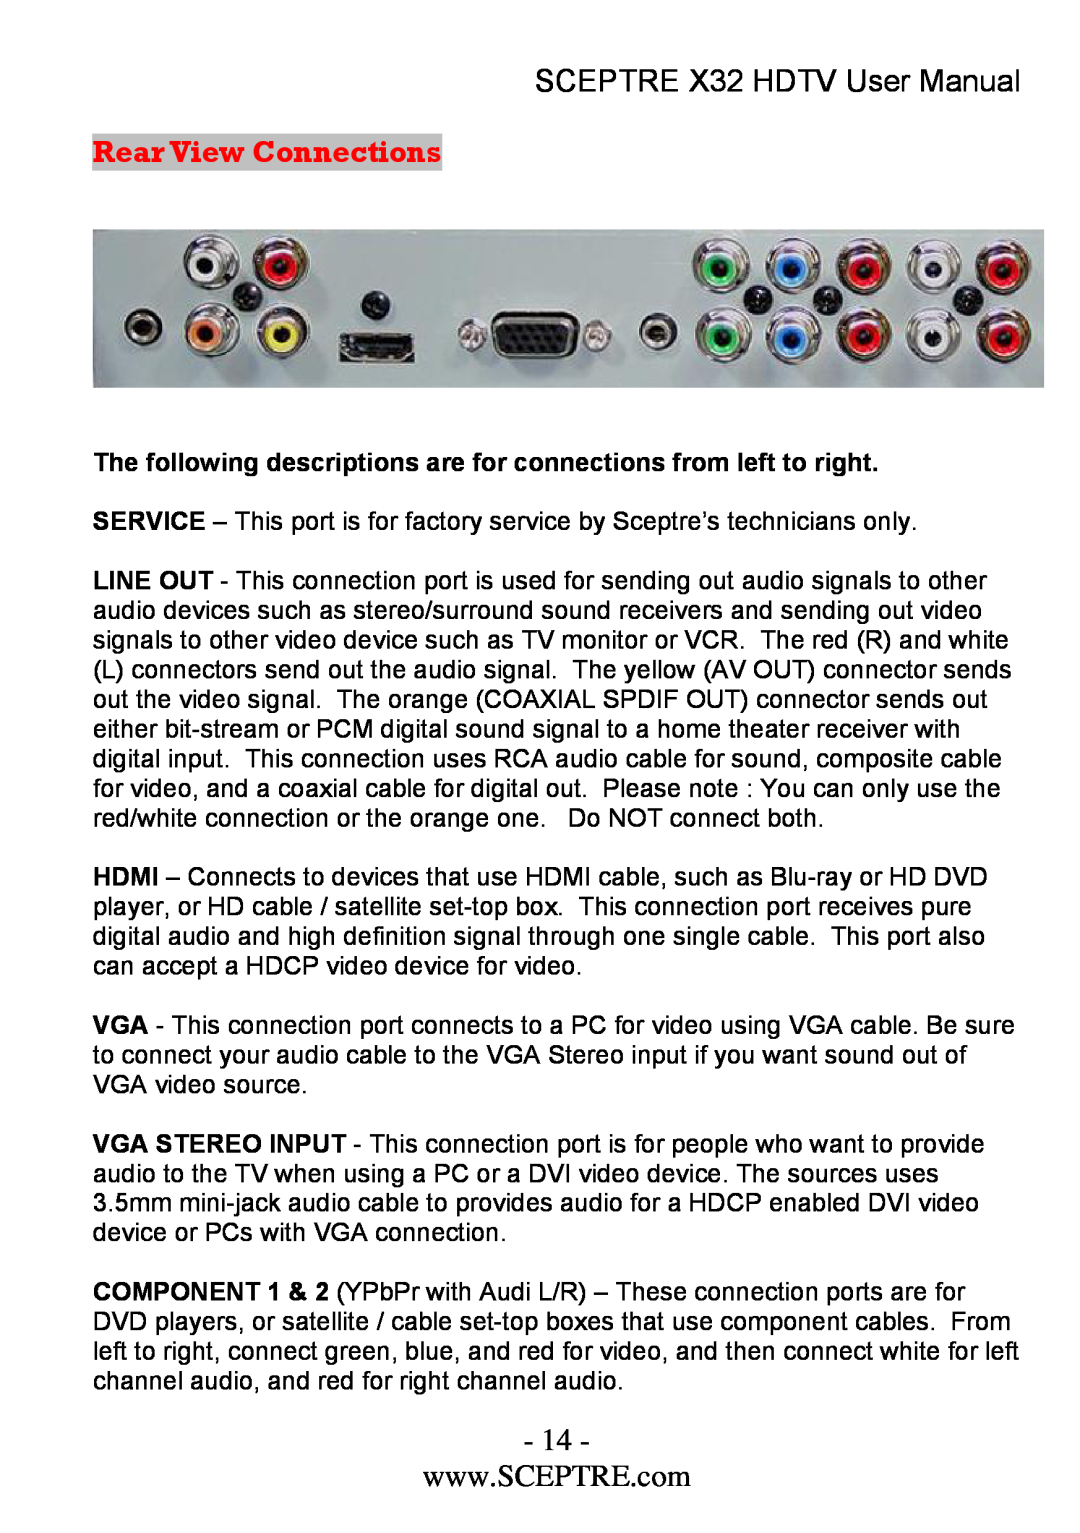 Sceptre Technologies x32 user manual Rear View Connections, SCEPTRE X32 HDTV User Manual 